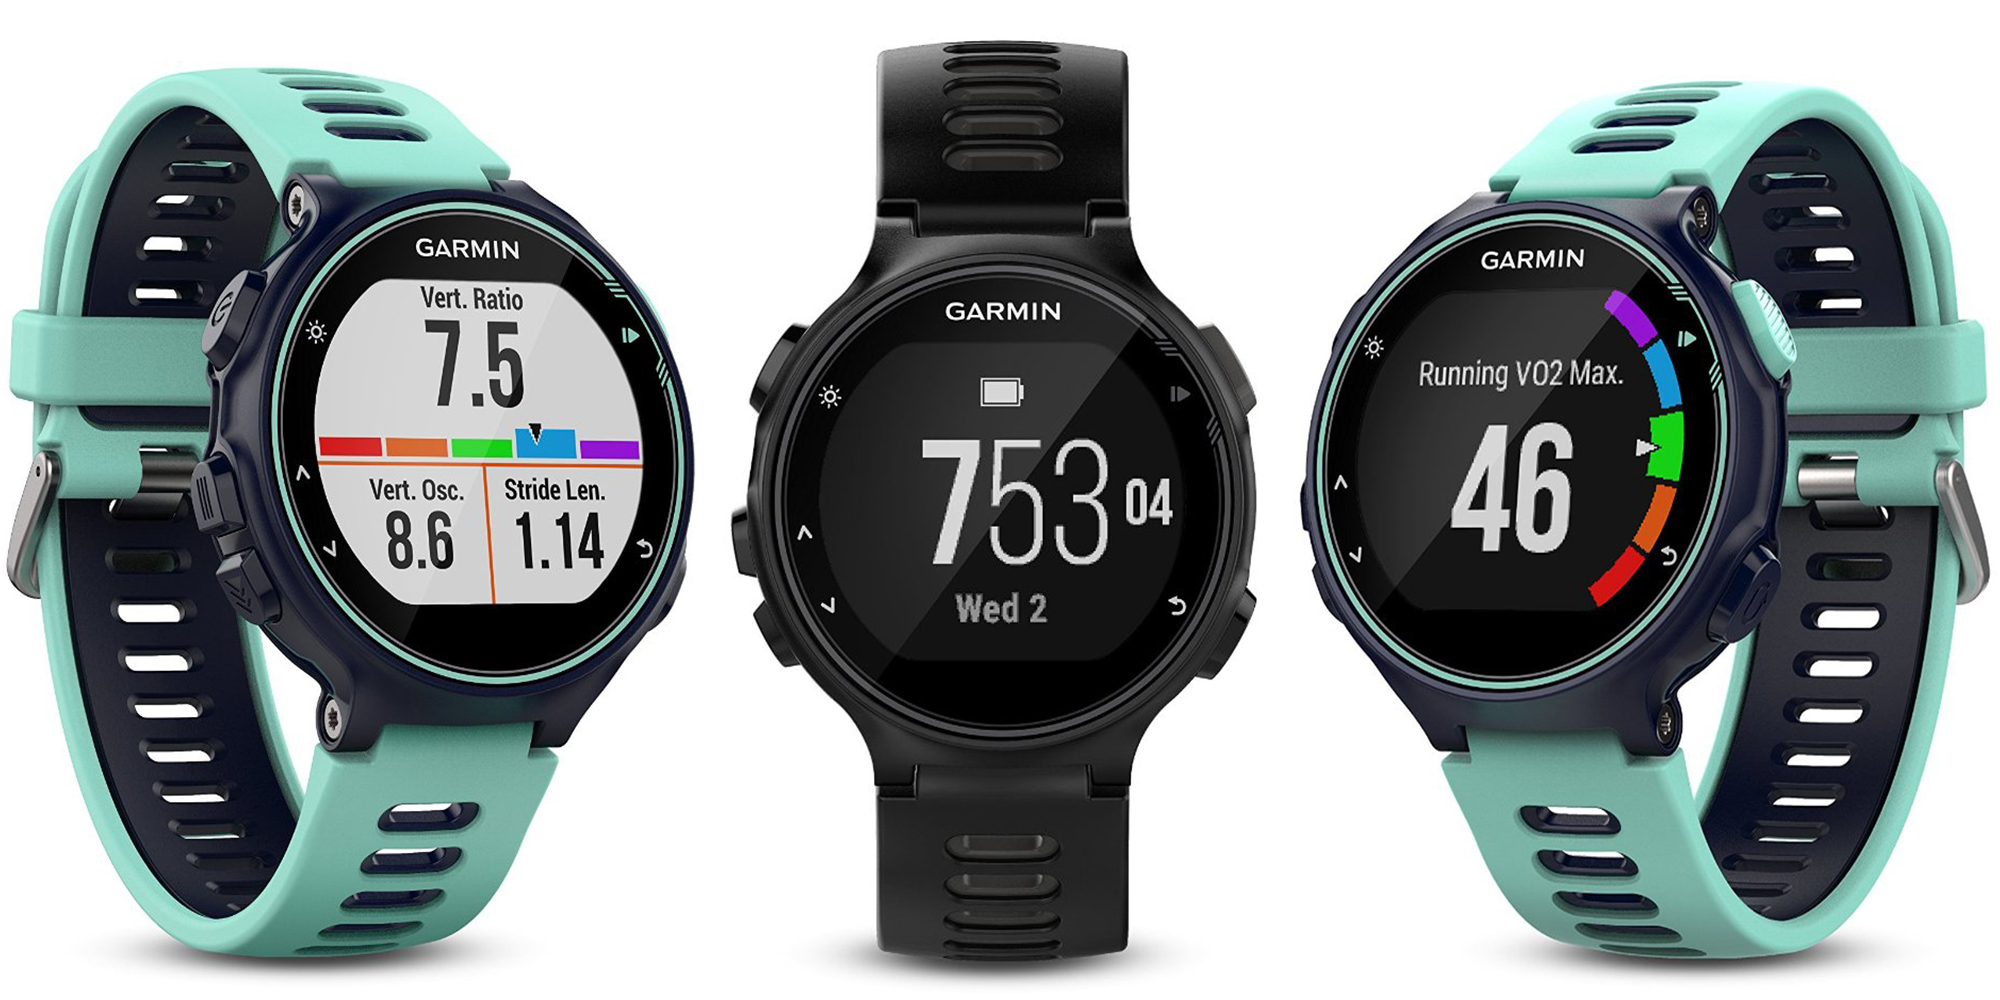 newest Garmin Fitness Tracker delivers a 'Suffer Score' after of your workouts